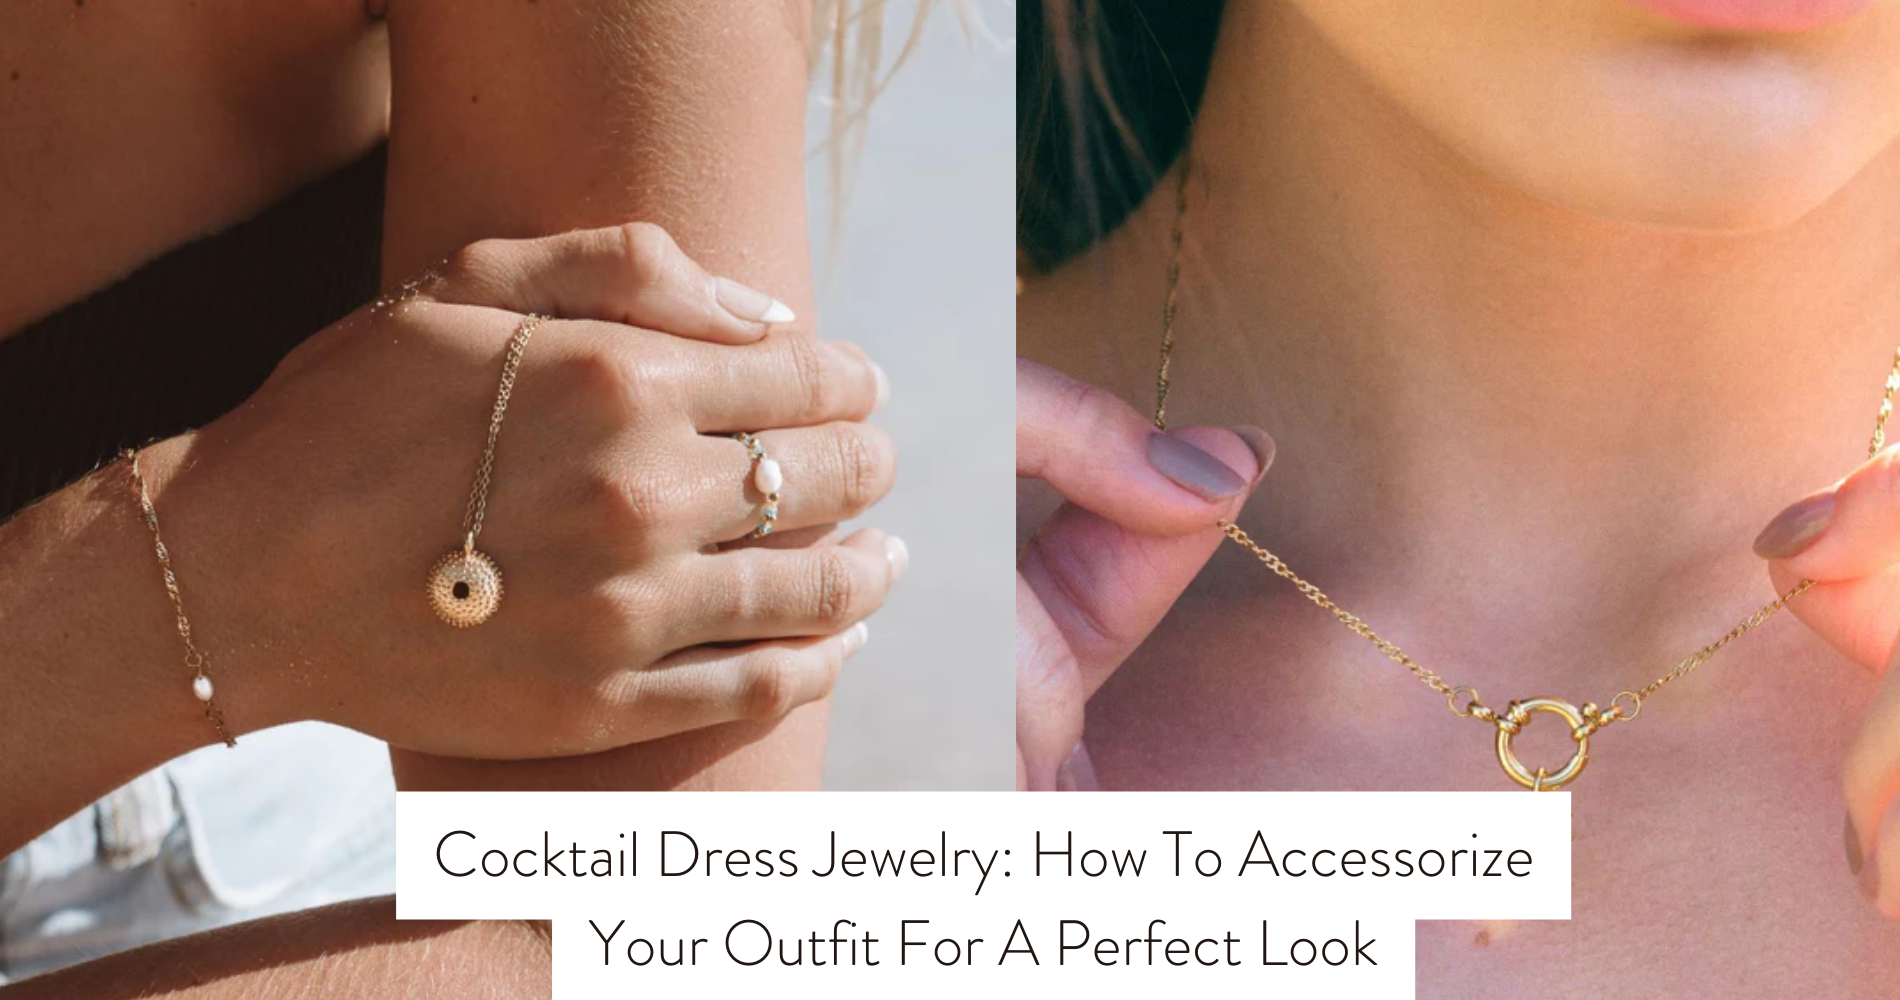 Cocktail Dress Jewelry: How To Accessorize Your Outfit For A Perfect Look